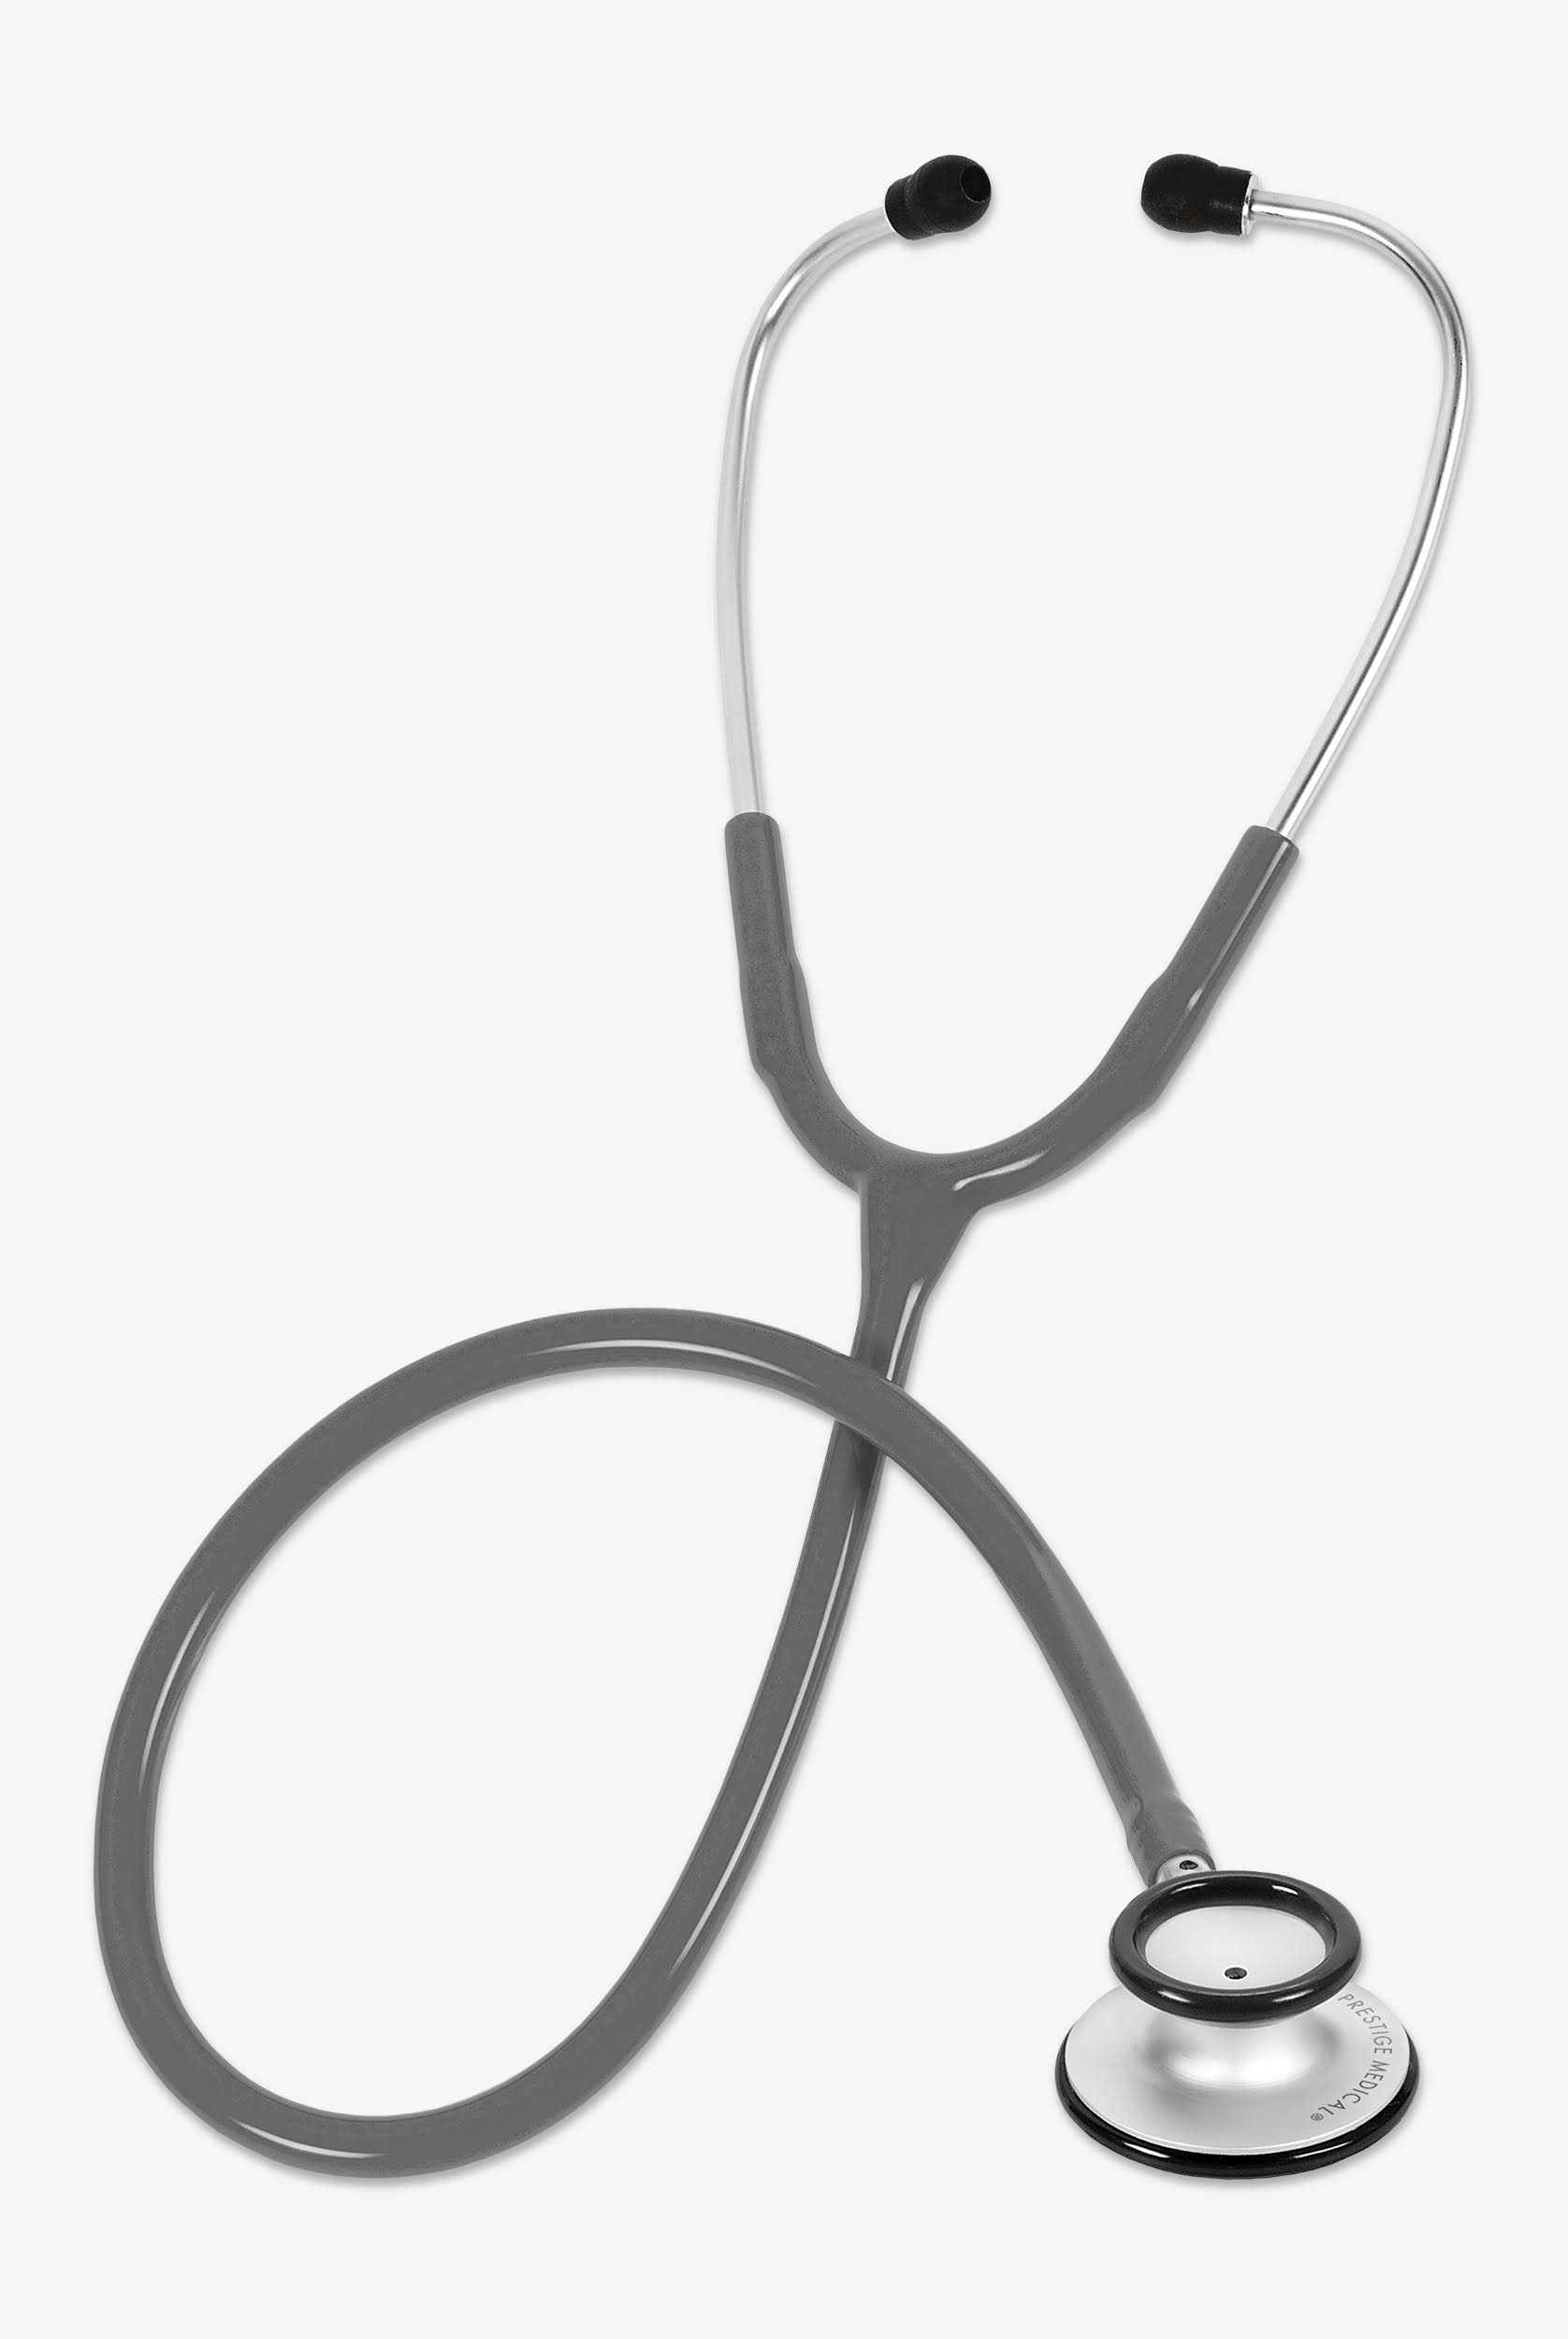 Prestige Clinical Lite 31 Stethoscope in Pewter